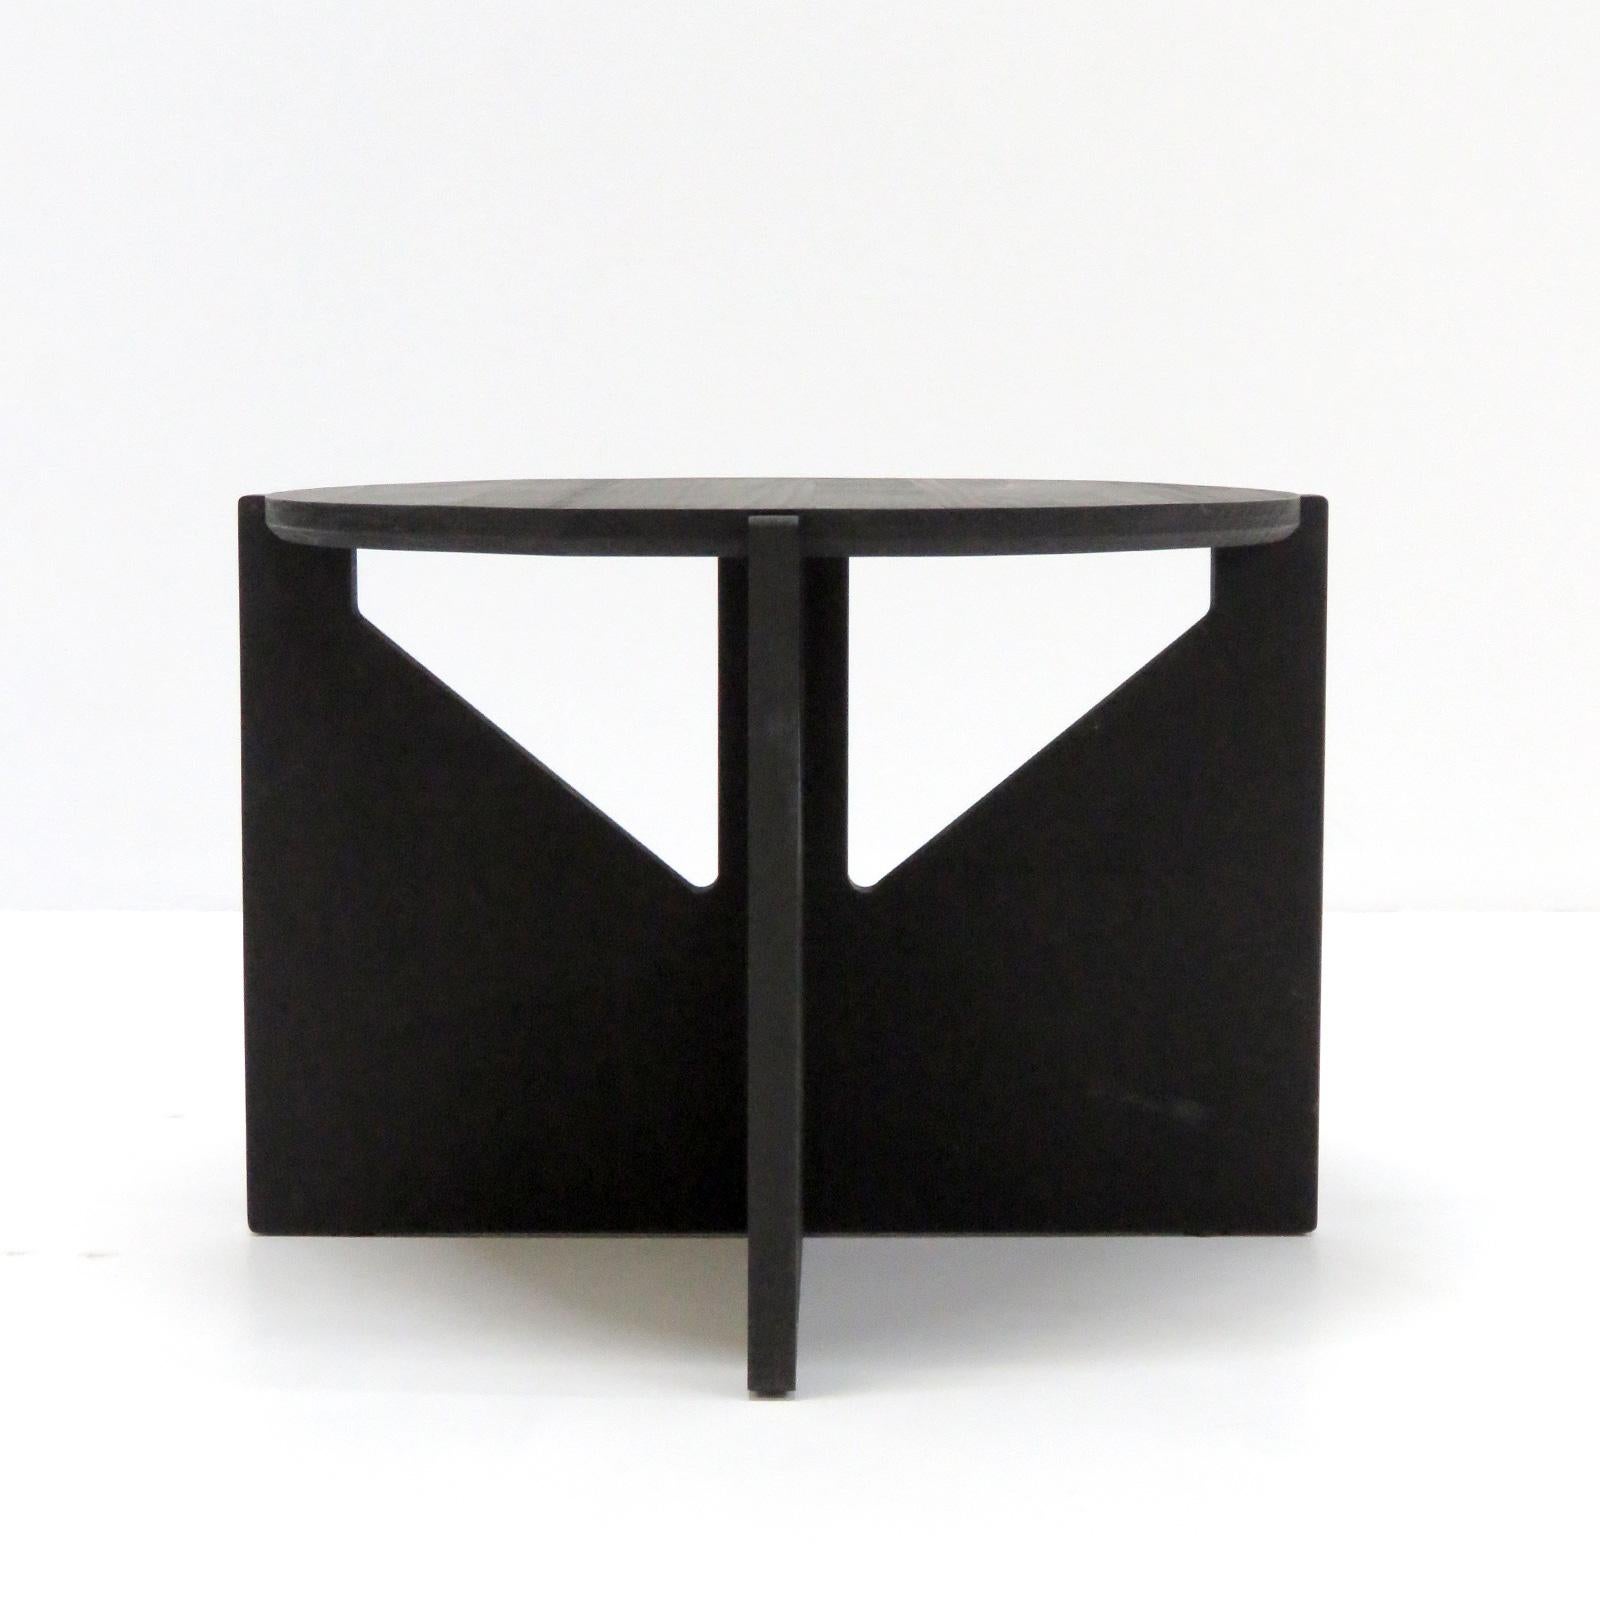 Wonderful pair of modern side tables or stools by Kristina Dam studio, Denmark in flat painted hardwood, marked.